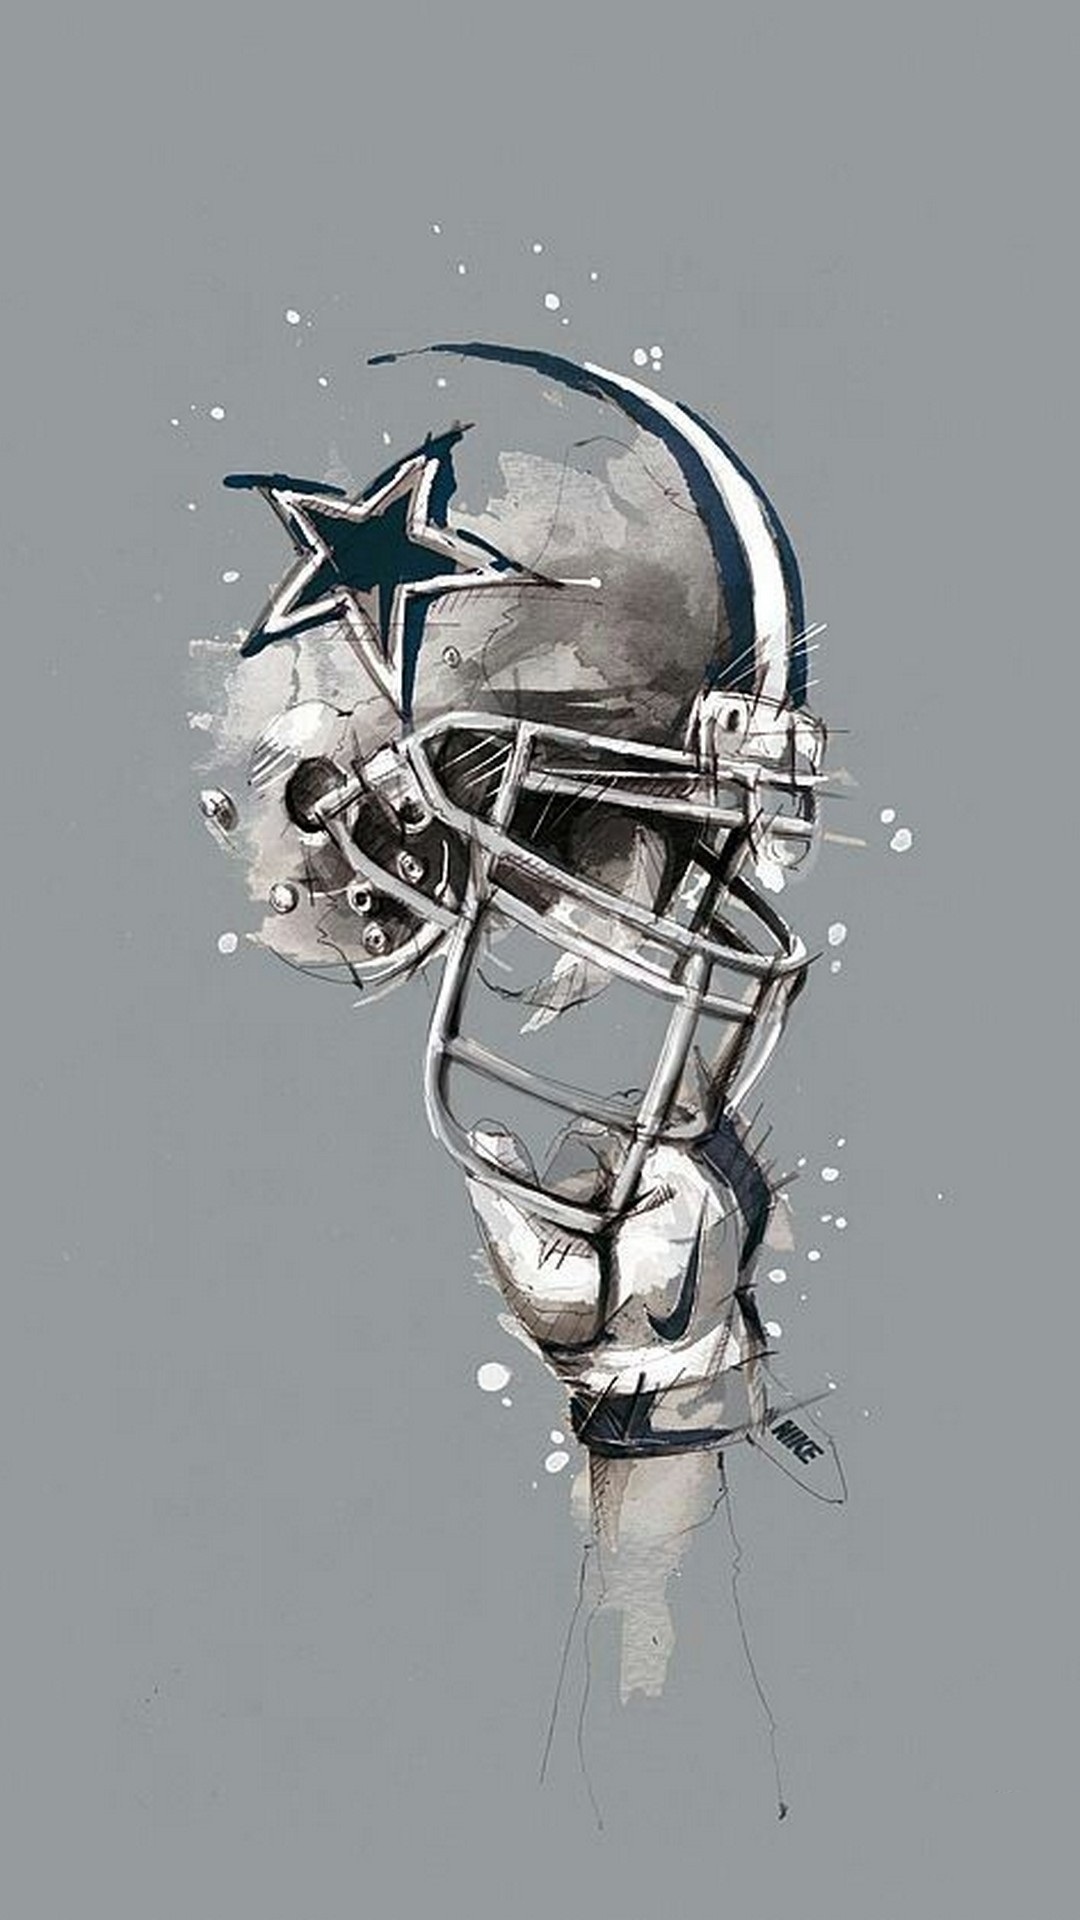 Dallas Cowboys iPhone Wallpaper in HD With high-resolution 1080X1920 pixel. Download and set as wallpaper for Apple iPhone X, XS Max, XR, 8, 7, 6, SE, iPad, Android